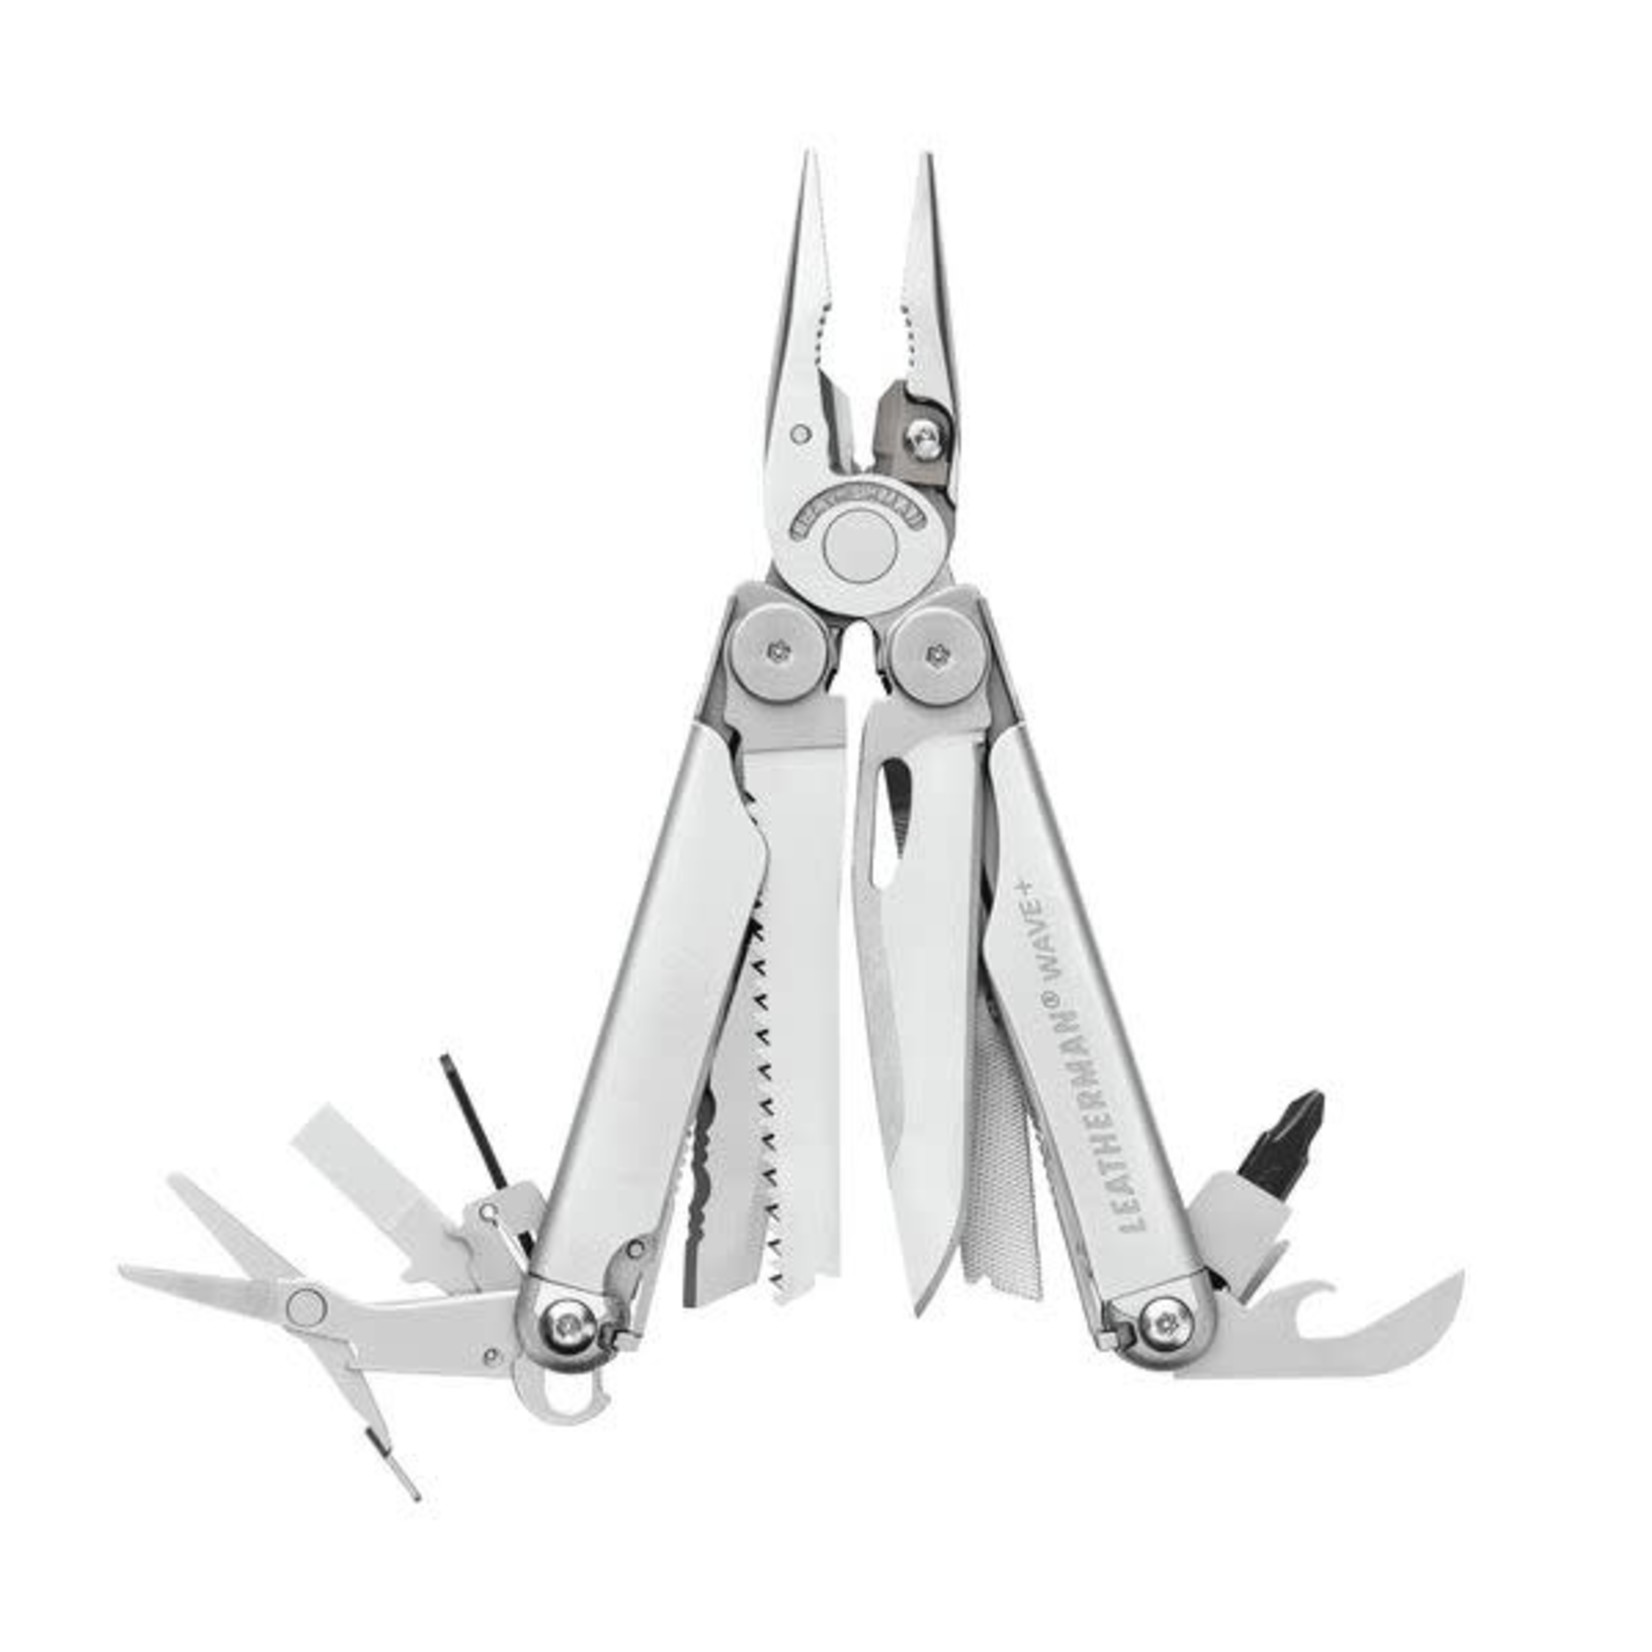 Leatherman Wave+ Stainless